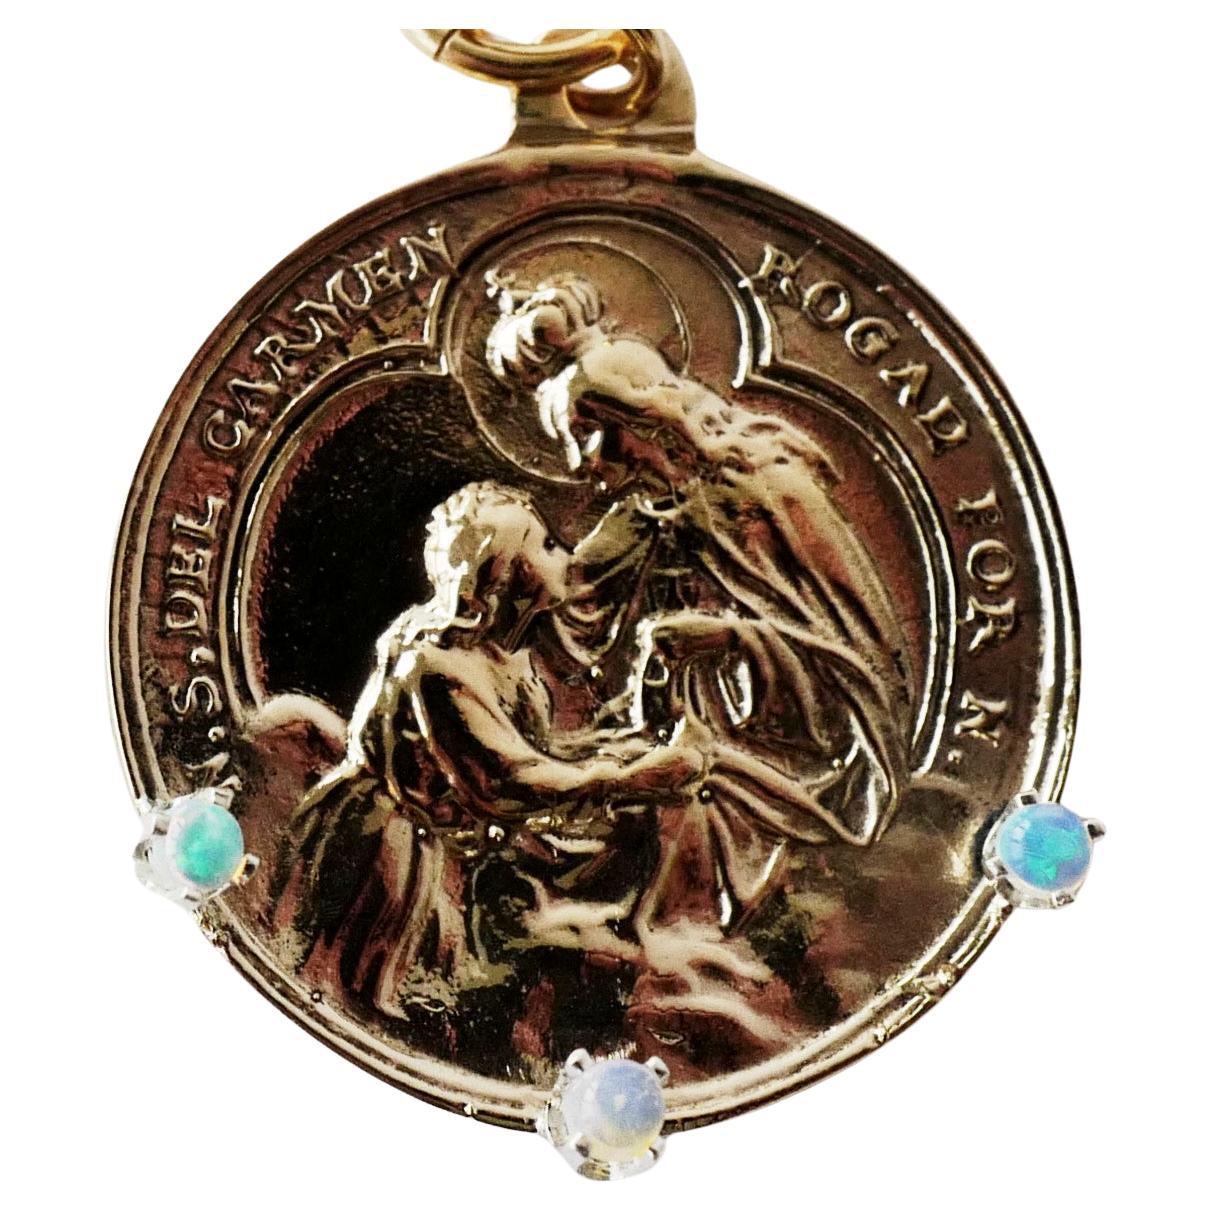 Virgin Mary Opal Medal Necklace Chunky Chain Pendant J Dauphin For Sale